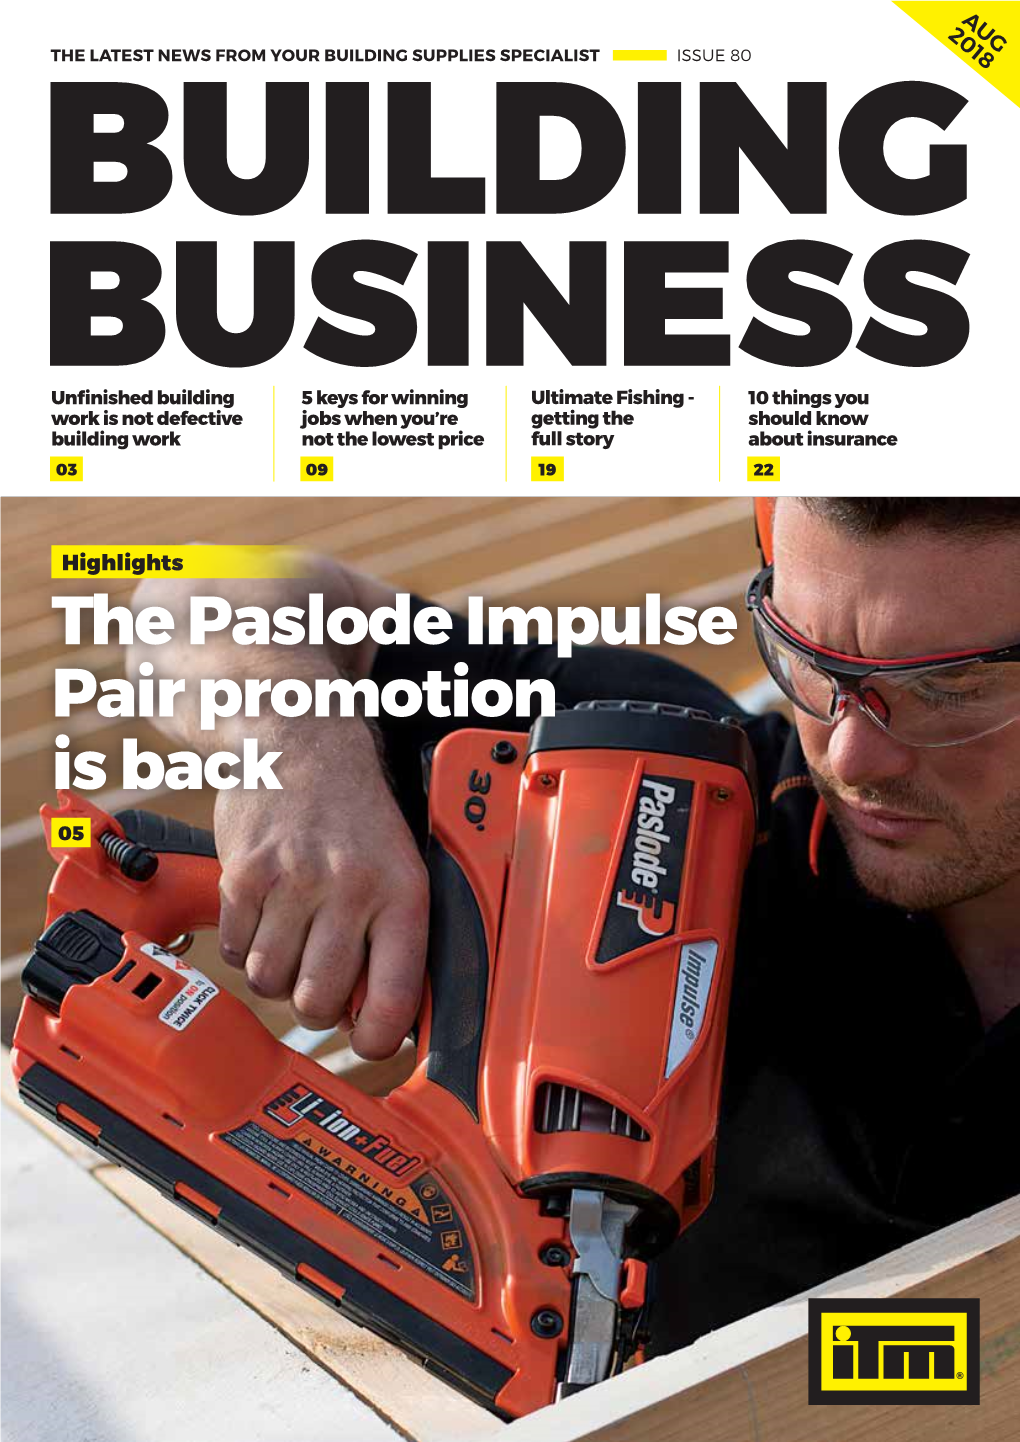 The Paslode Impulse Pair Promotion Is Back 05 ISSUE 80: AUG 2018